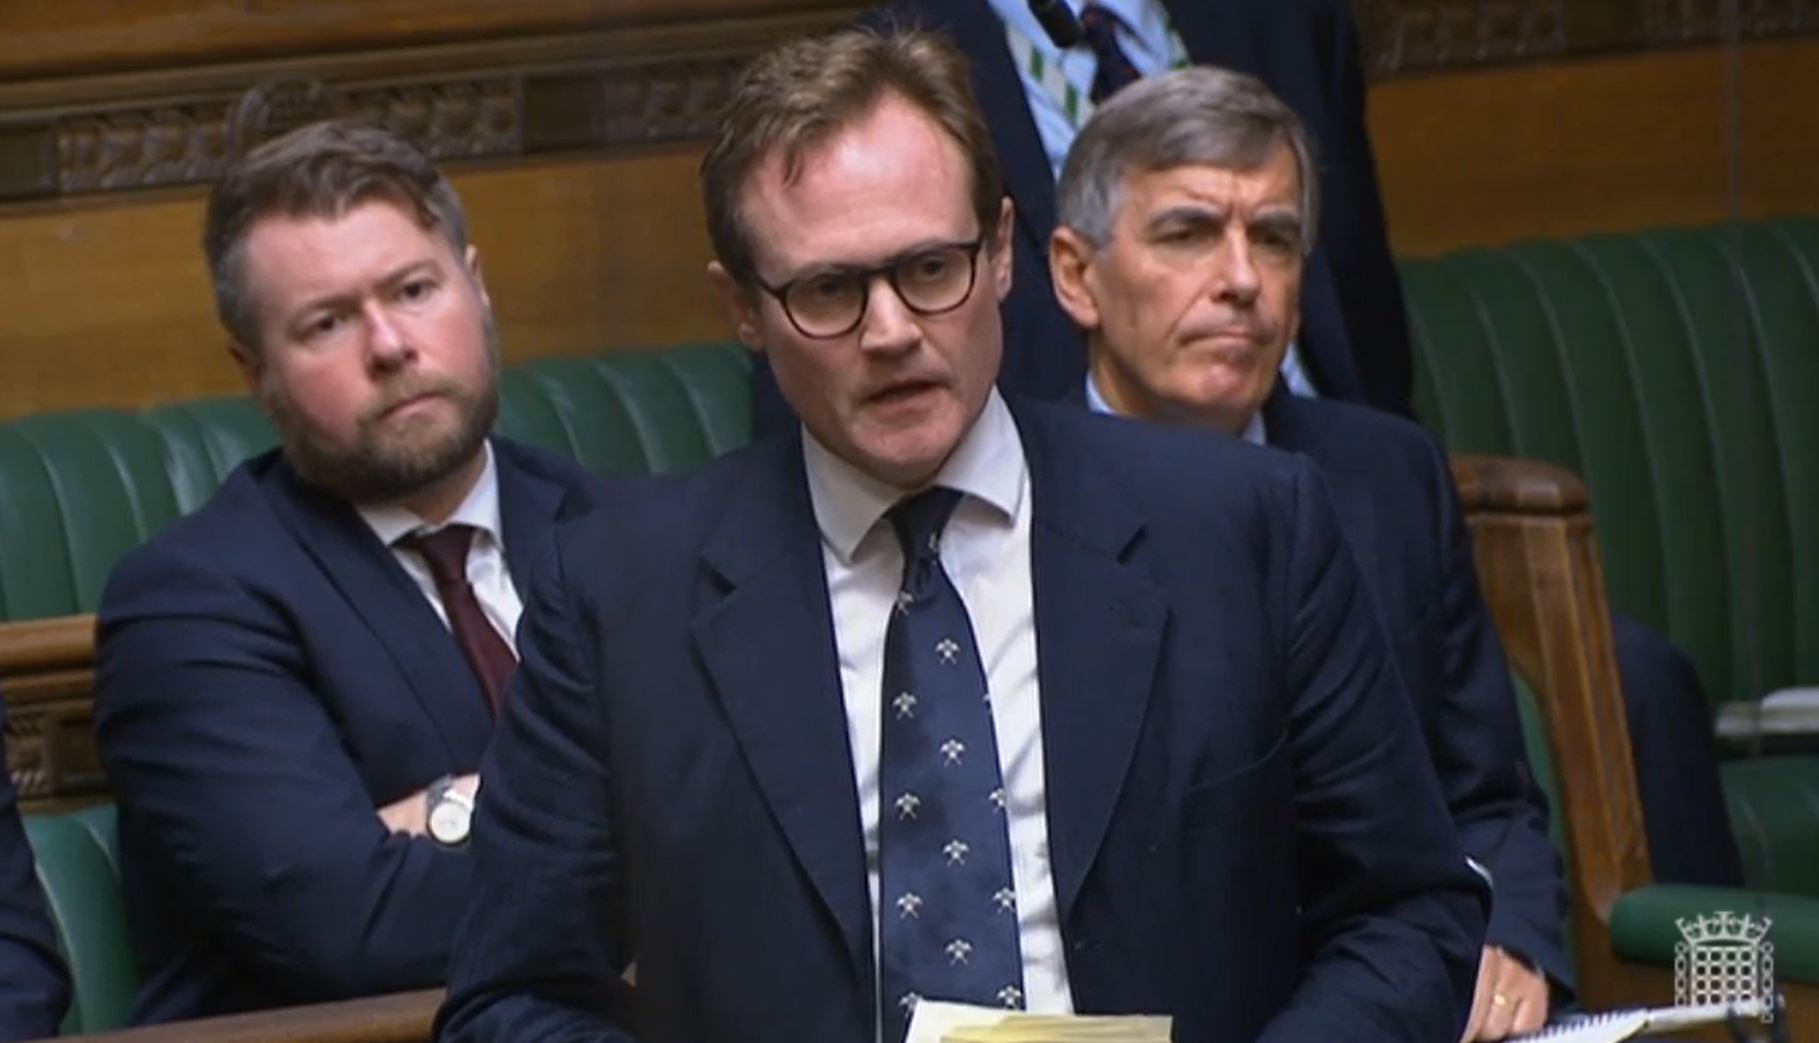 Tom Tugendhat has already announced he will run if Johnson is ousted